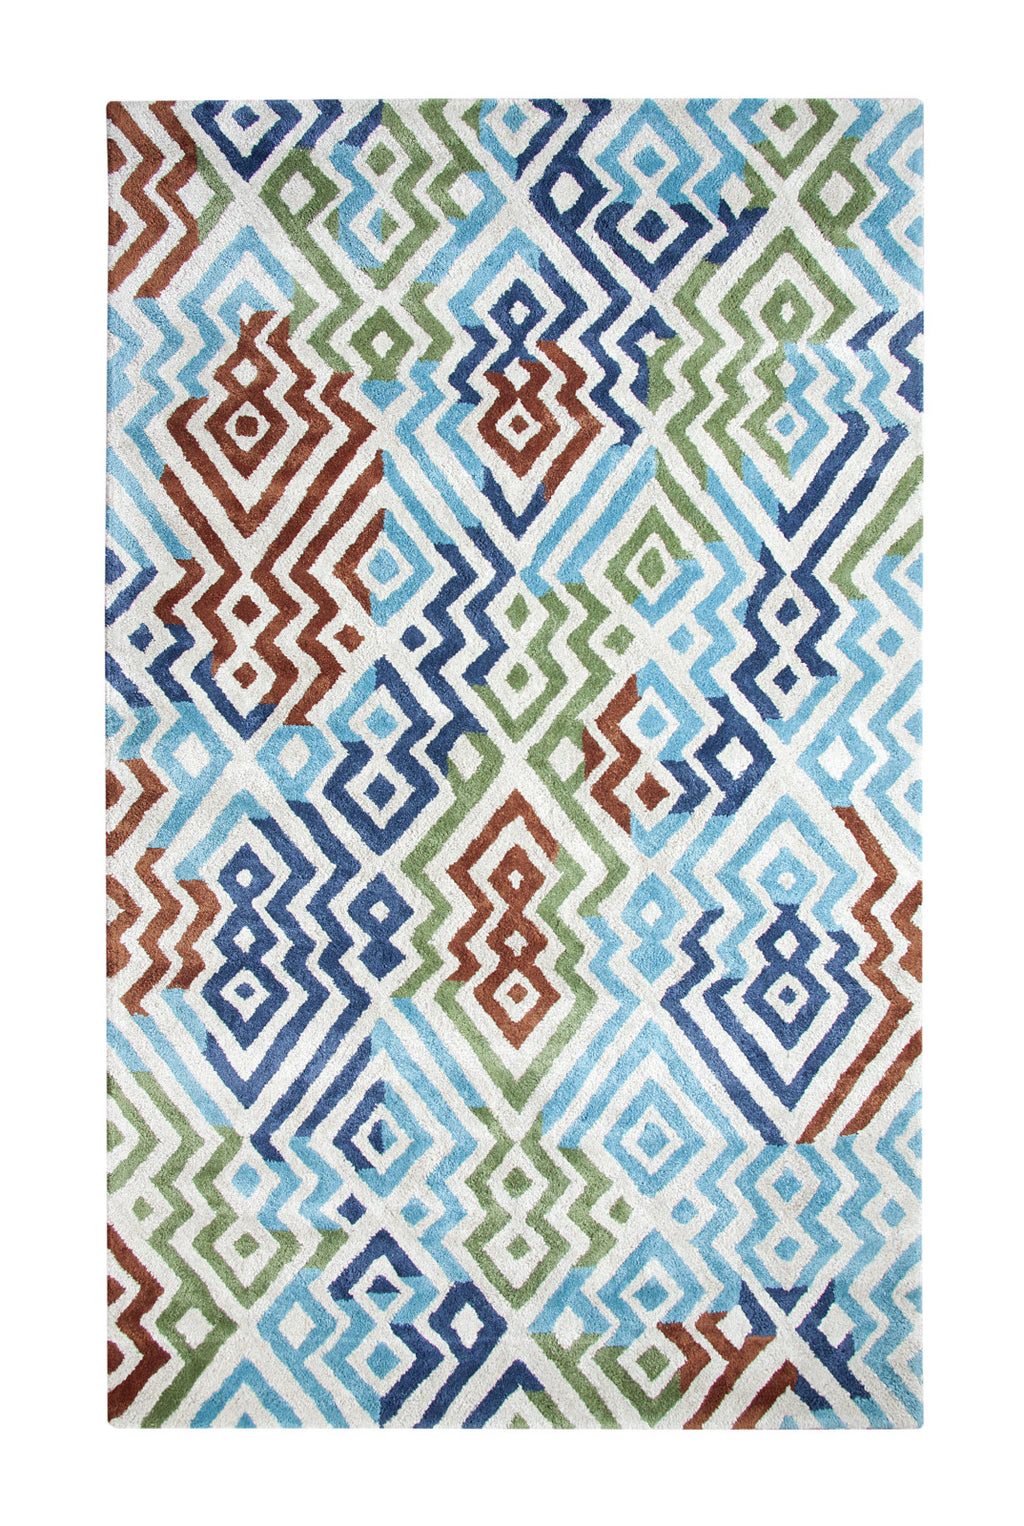 Dynamic Rugs Vogue 881000 Silver/Turquoise Area Rug main image